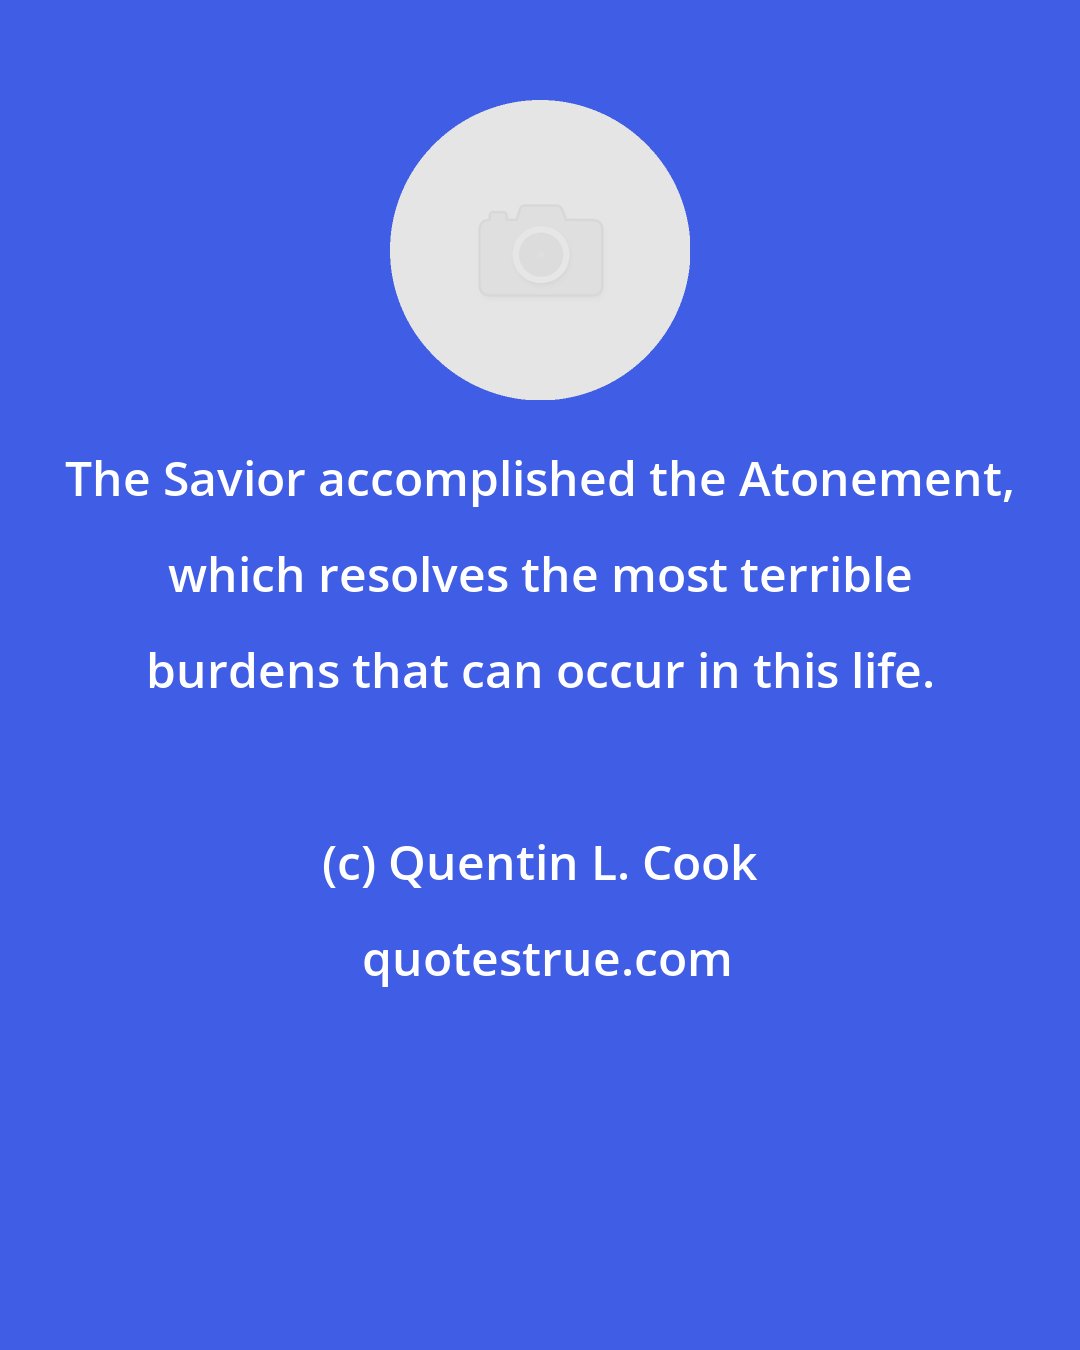 Quentin L. Cook: The Savior accomplished the Atonement, which resolves the most terrible burdens that can occur in this life.